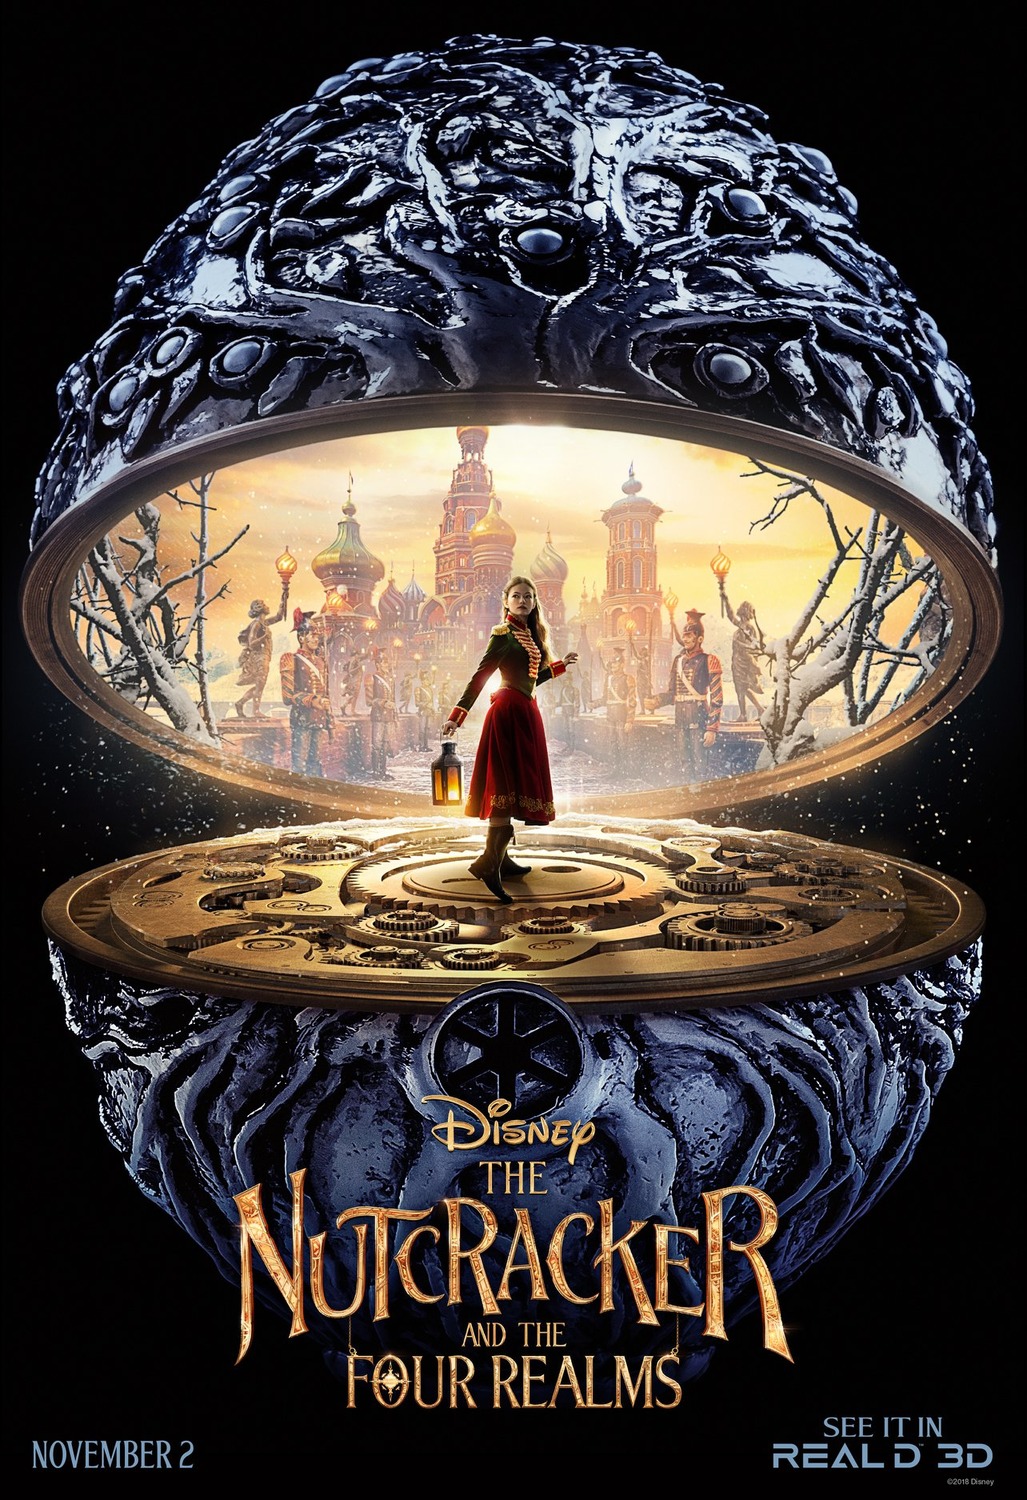 Extra Large Movie Poster Image for The Nutcracker and the Four Realms (#24 of 24)